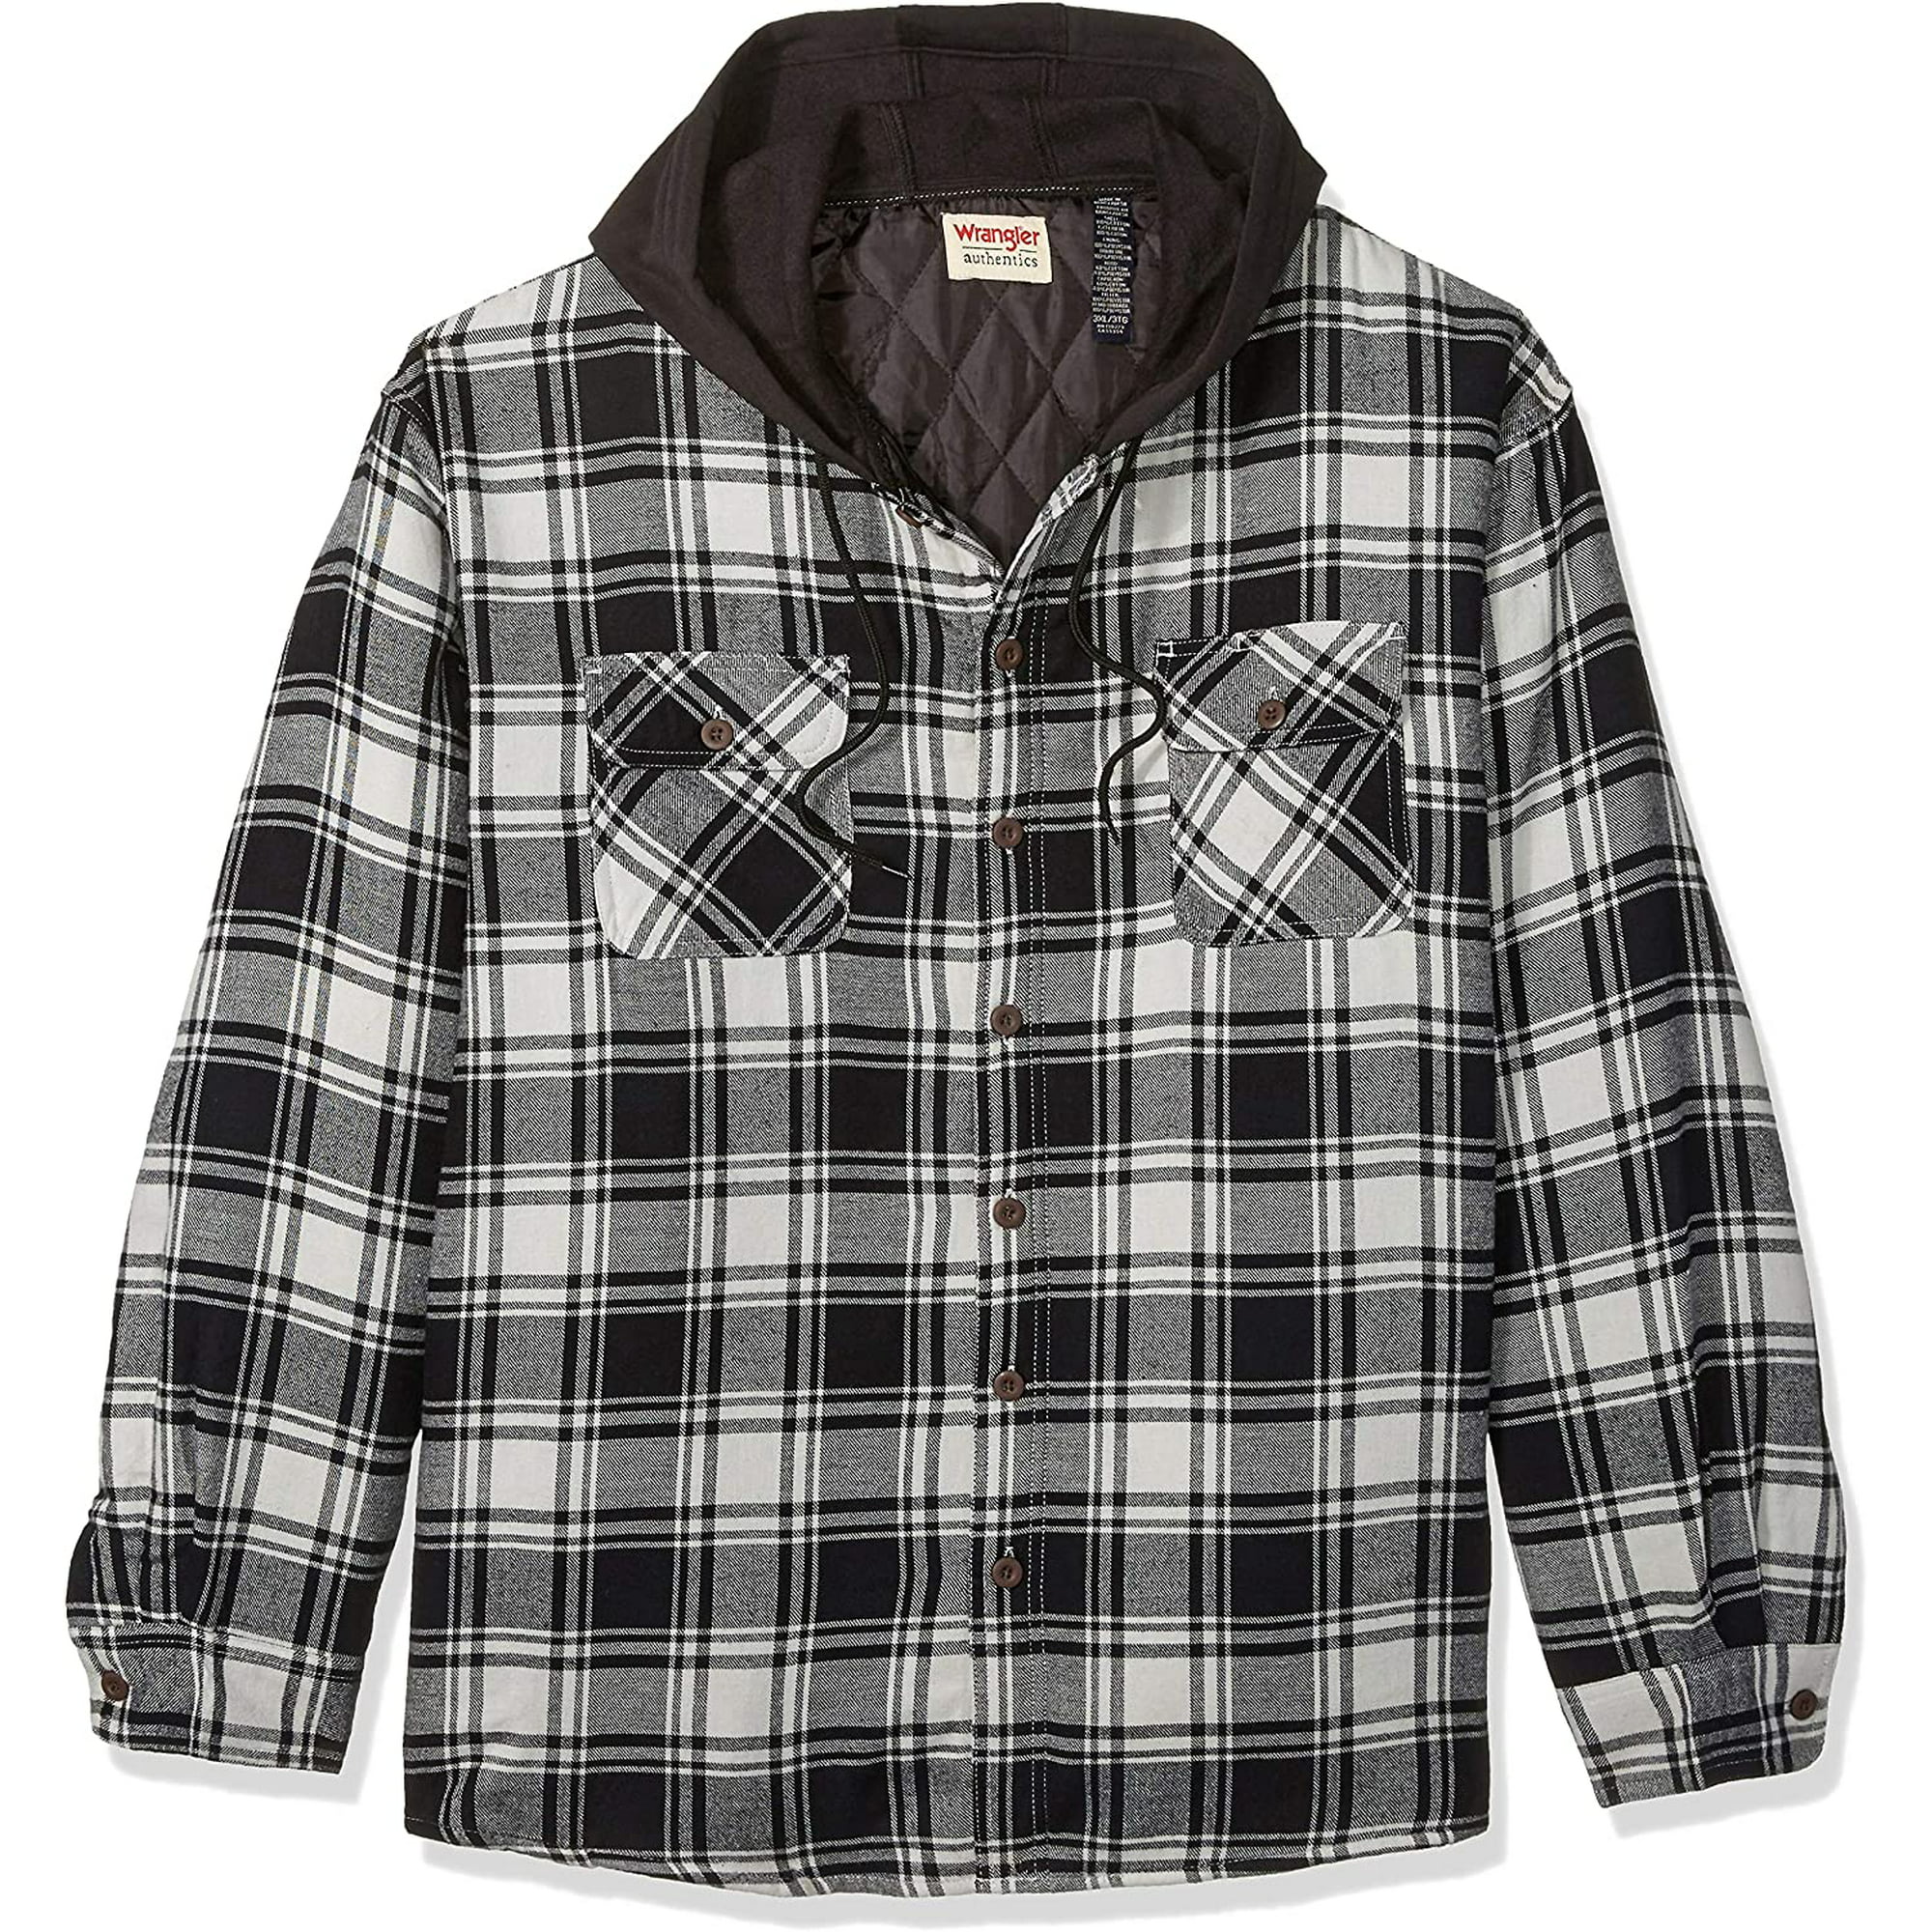 Mens Long Sleeve Quilted Lined Flannel Shirt Jacket W/ Hood | Walmart Canada